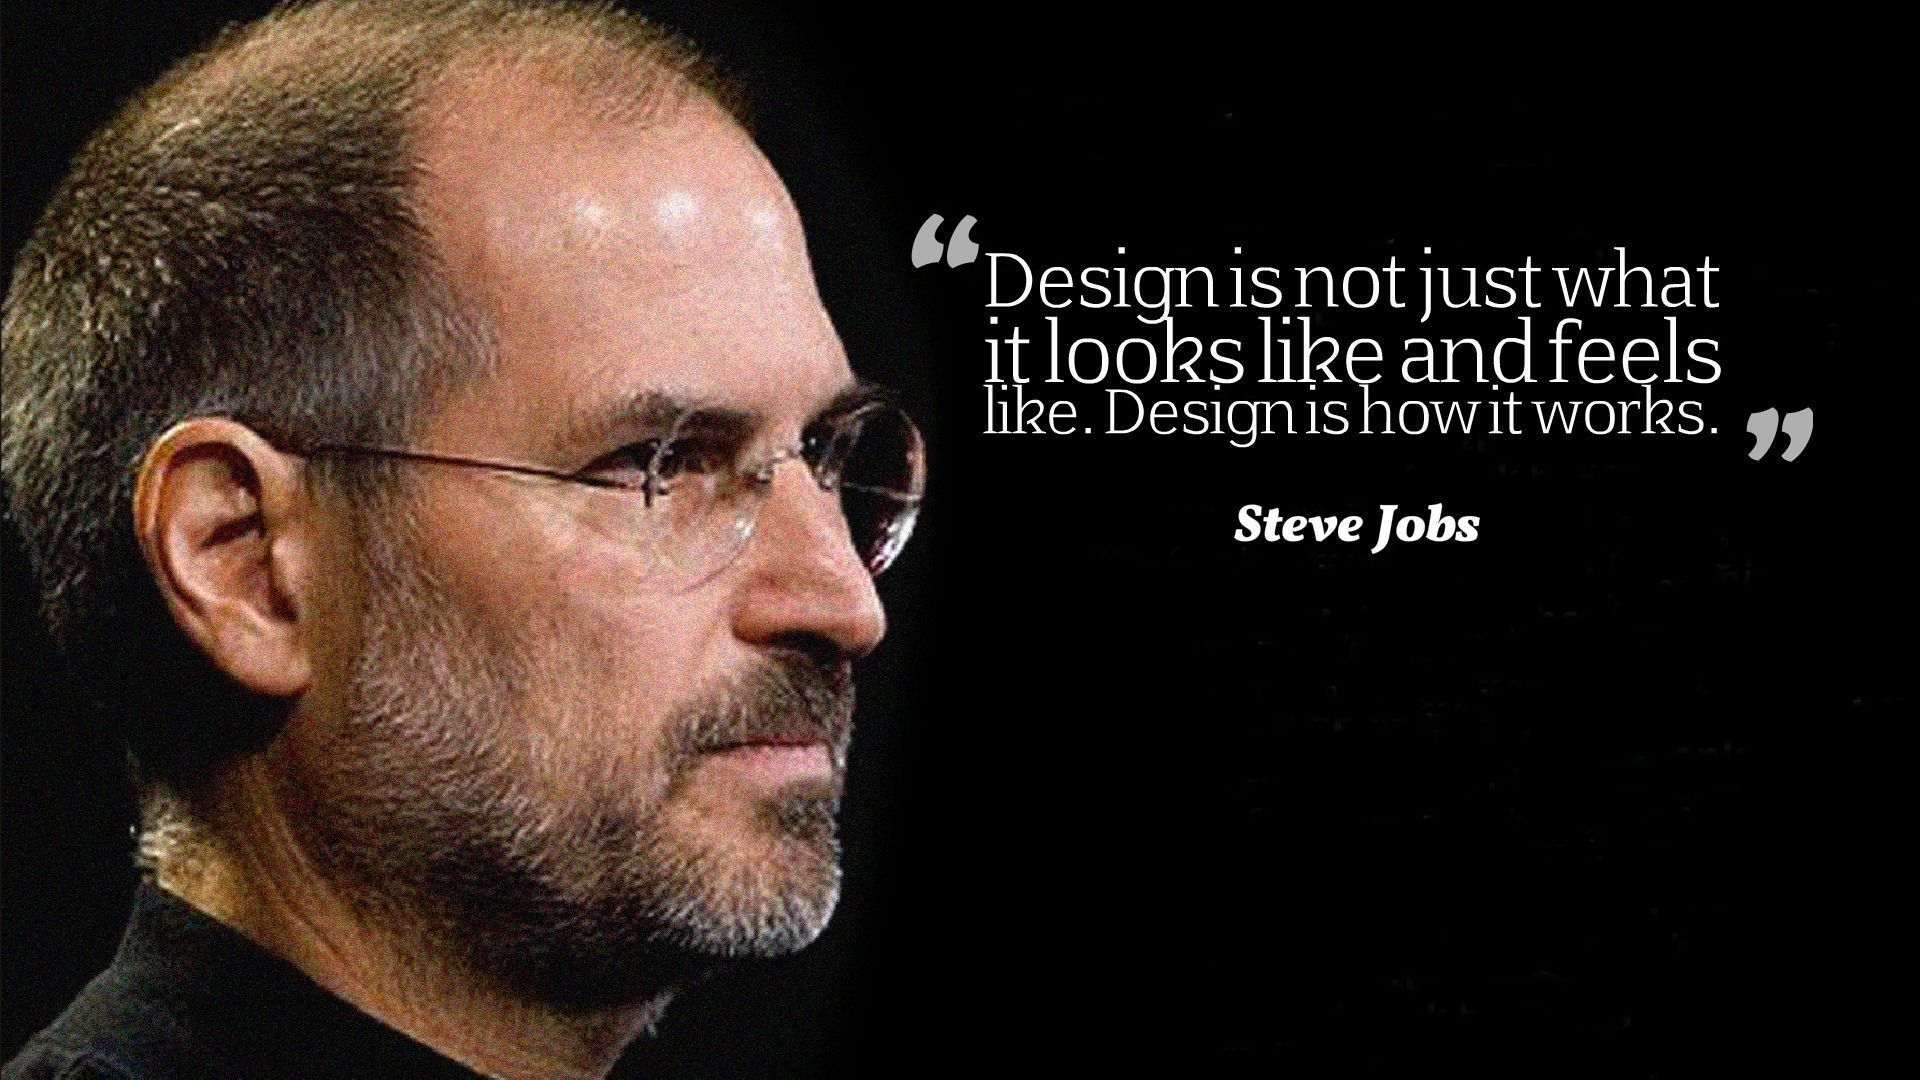 IPhone X Wallpaper - (Steve Jobs Quotes) Free Download | Behance